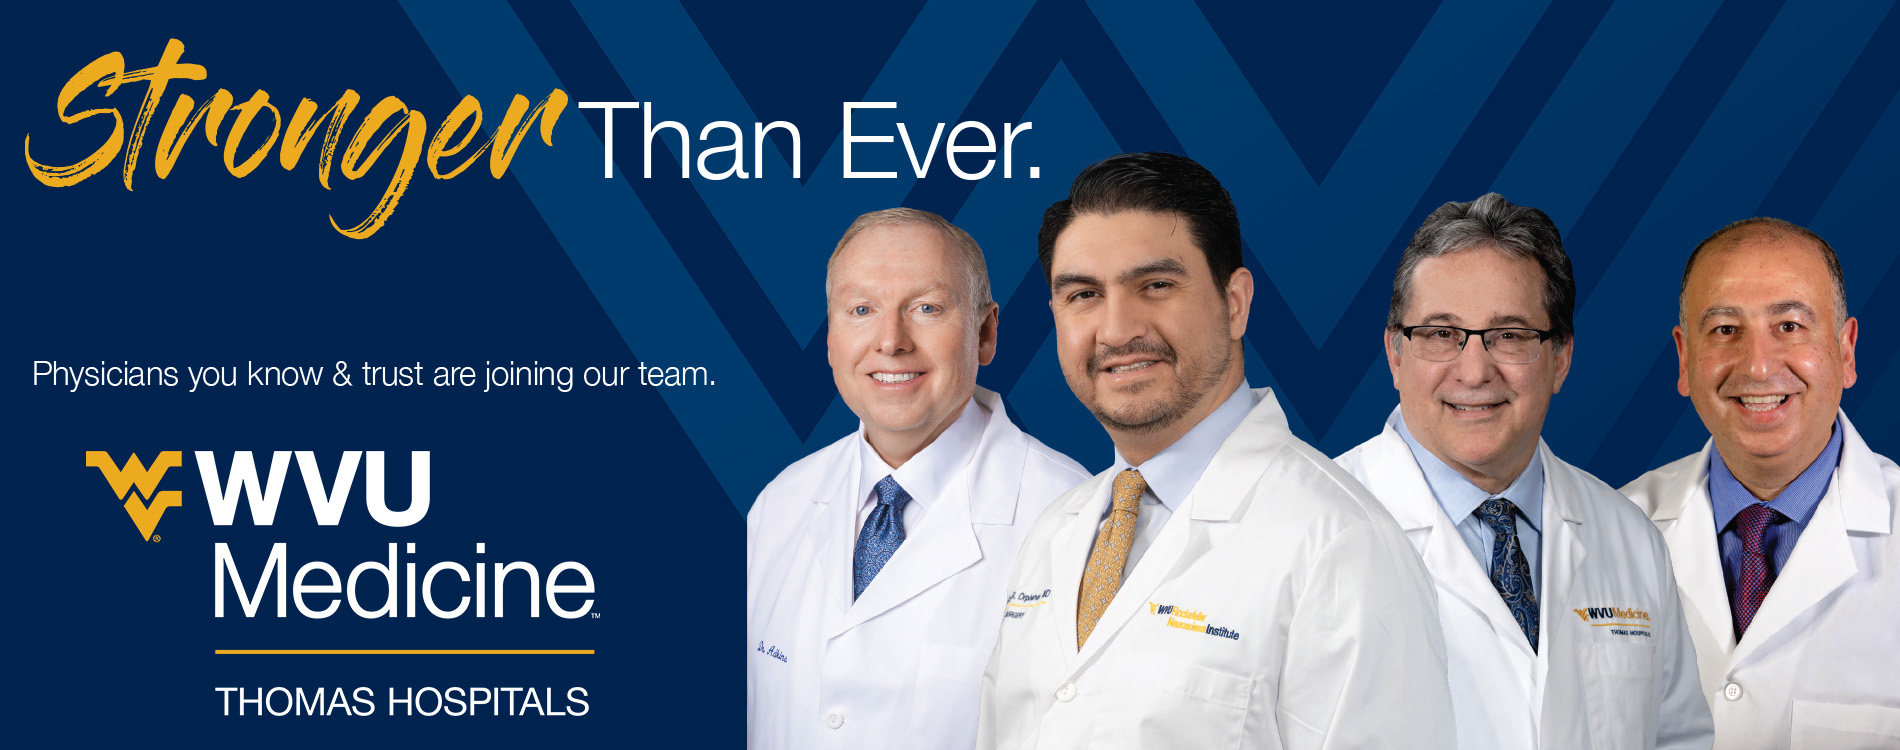 Stronger Than Ever Physicians you know and trust are joining our team Thomas Hospitals header image